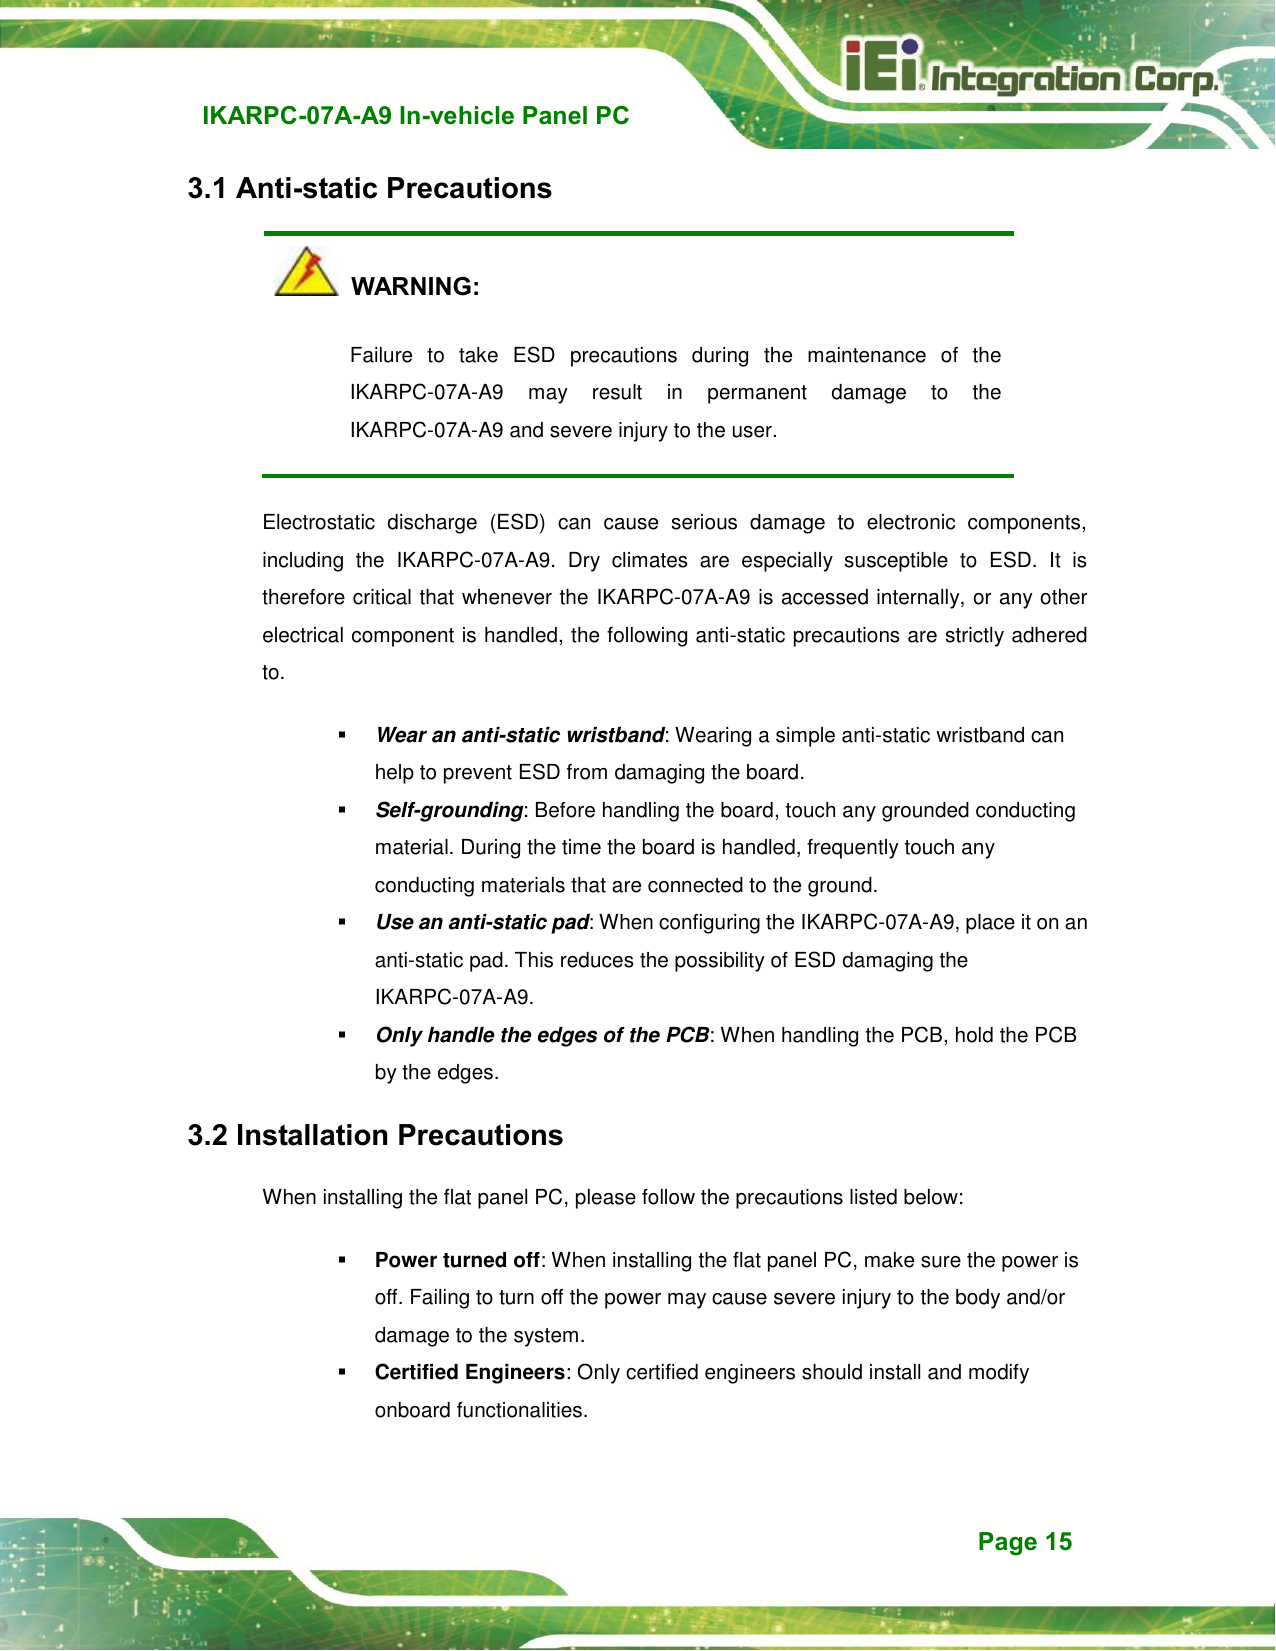   IKARPC-07A-A9 In-vehicle Panel PC  Page 15 3.1 Anti-static Precautions   WARNING: Failure  to  take  ESD  precautions  during  the  maintenance  of  the IKARPC-07A-A9  may  result  in  permanent  damage  to  the IKARPC-07A-A9 and severe injury to the user.   Electrostatic  discharge  (ESD)  can  cause  serious  damage  to  electronic  components, including  the  IKARPC-07A-A9.  Dry  climates  are  especially  susceptible  to  ESD.  It  is therefore critical that whenever the IKARPC-07A-A9 is accessed internally, or any other electrical component is handled, the following anti-static precautions are strictly adhered to.  Wear an anti-static wristband: Wearing a simple anti-static wristband can help to prevent ESD from damaging the board.  Self-grounding: Before handling the board, touch any grounded conducting material. During the time the board is handled, frequently touch any conducting materials that are connected to the ground.  Use an anti-static pad: When configuring the IKARPC-07A-A9, place it on an anti-static pad. This reduces the possibility of ESD damaging the IKARPC-07A-A9.  Only handle the edges of the PCB: When handling the PCB, hold the PCB by the edges. 3.2 Installation Precautions When installing the flat panel PC, please follow the precautions listed below:  Power turned off: When installing the flat panel PC, make sure the power is off. Failing to turn off the power may cause severe injury to the body and/or damage to the system.  Certified Engineers: Only certified engineers should install and modify onboard functionalities.   